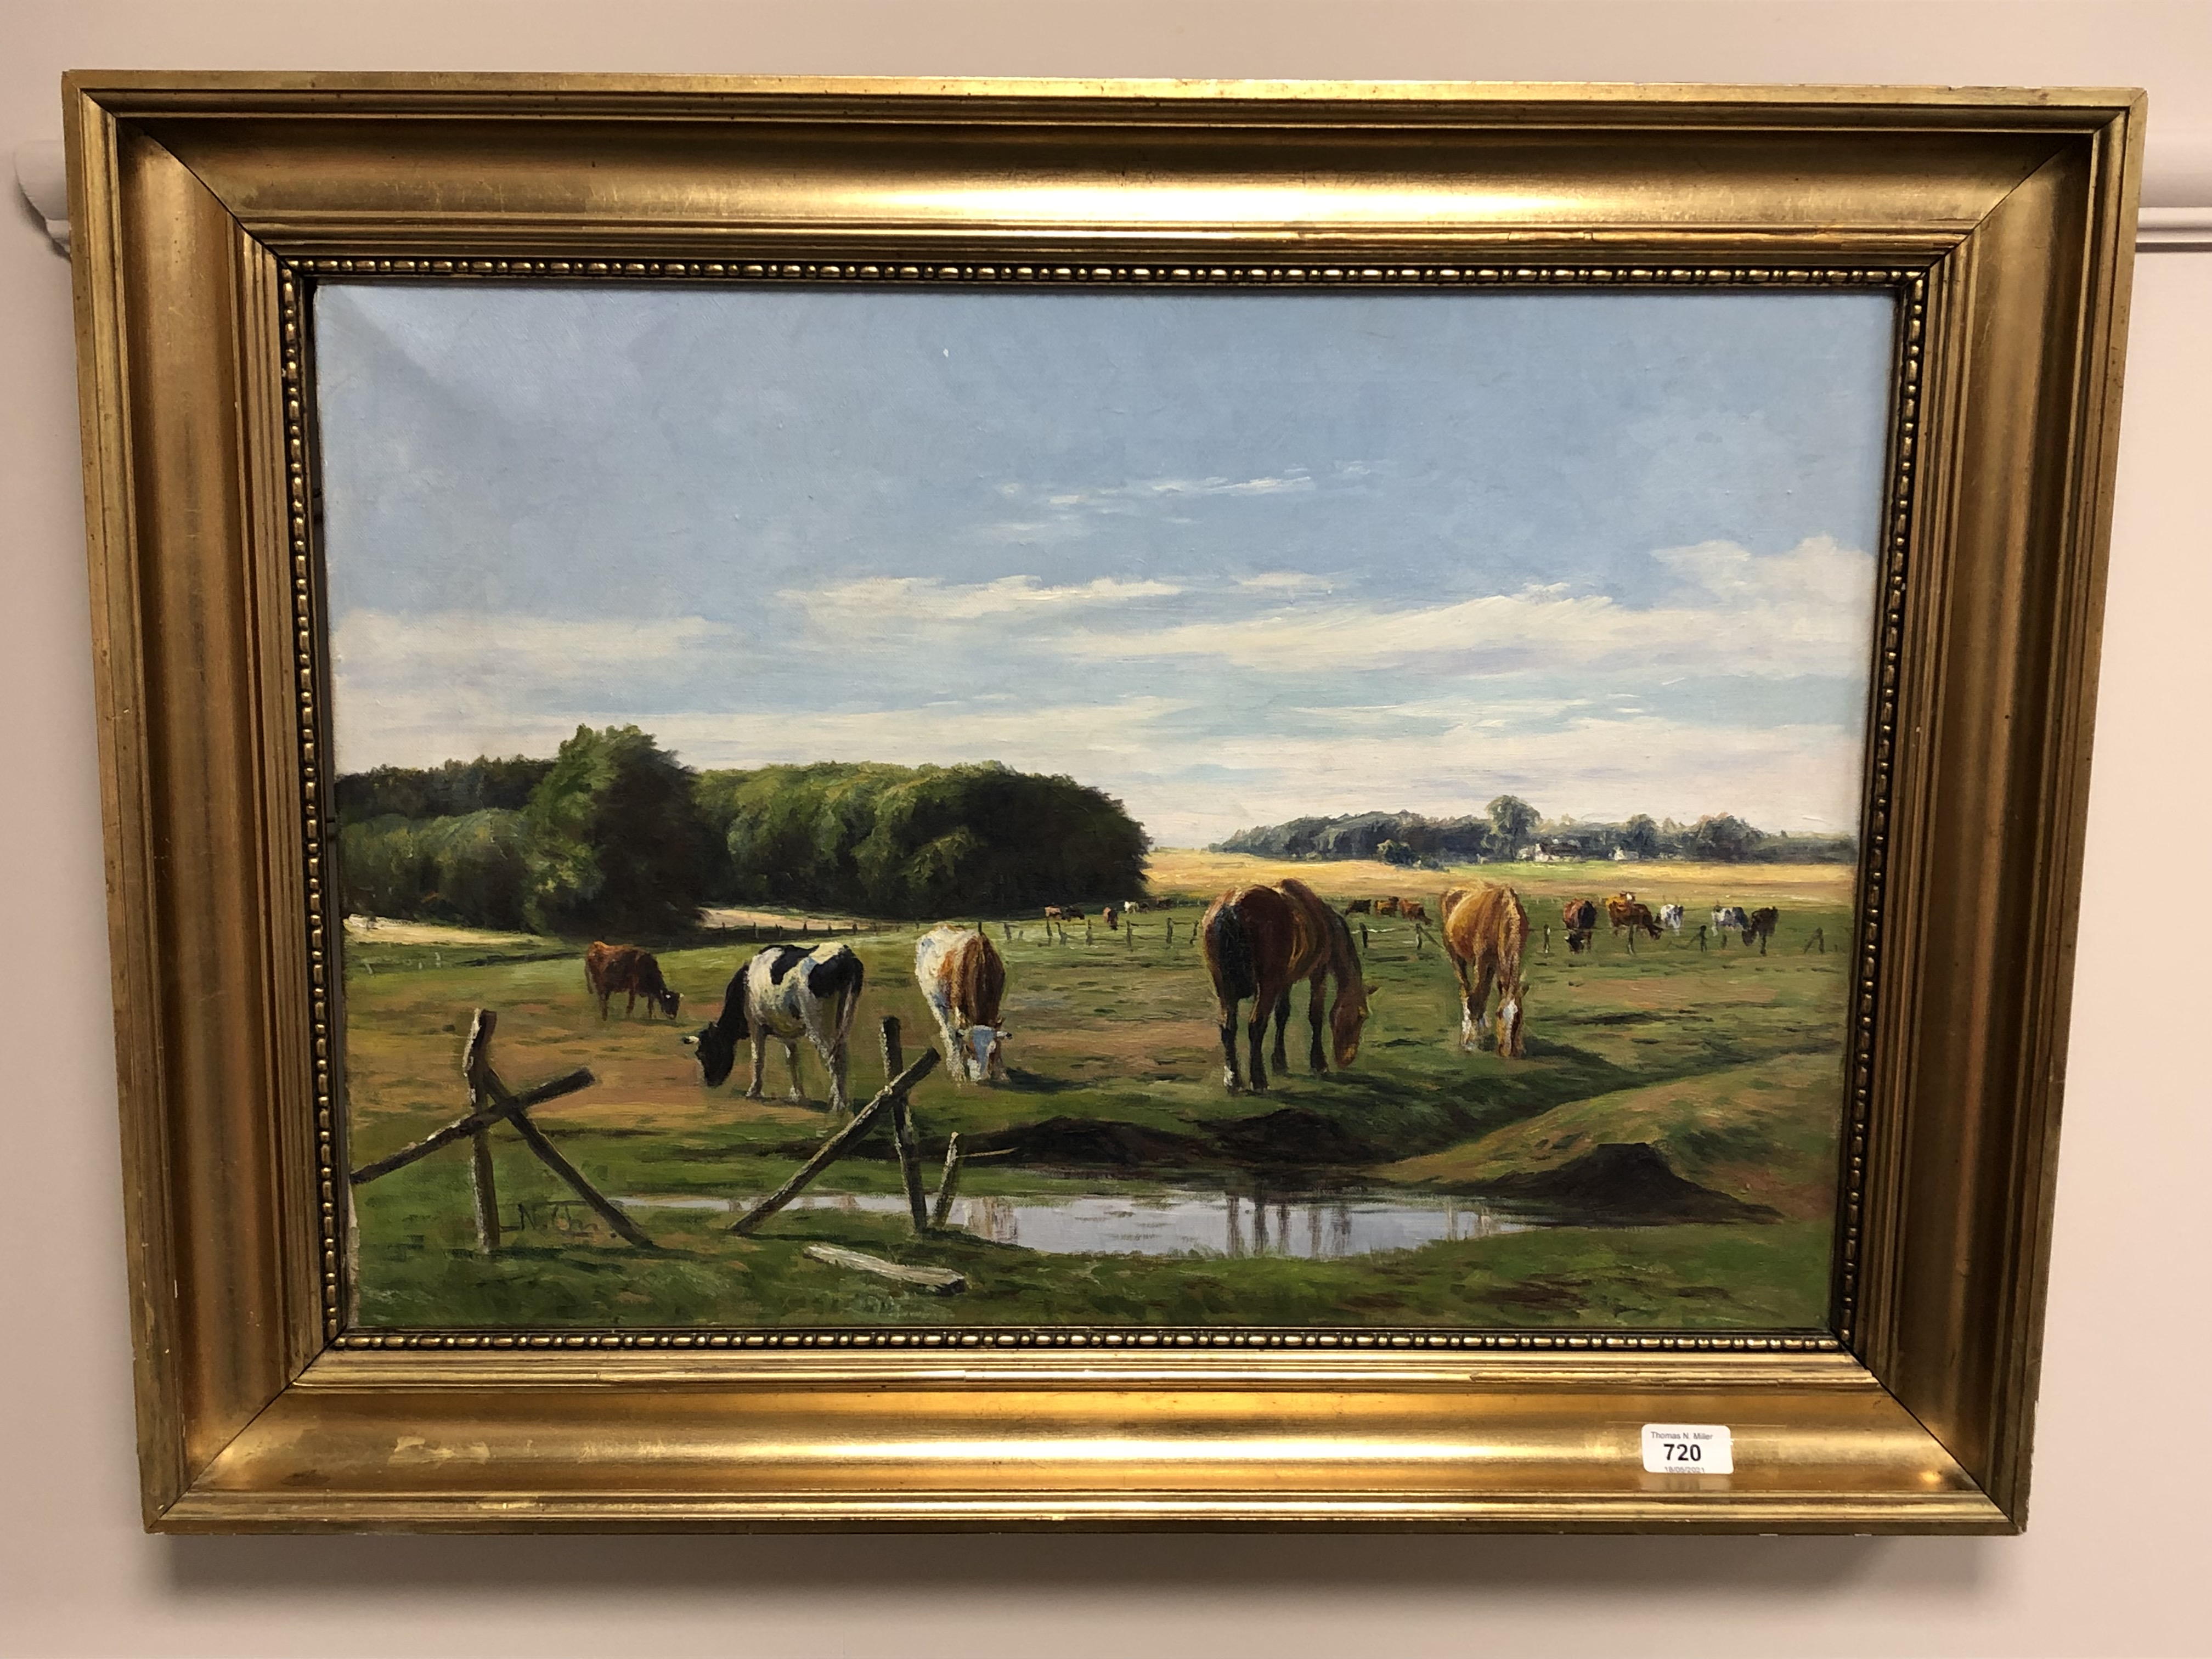 Continental School : Horses in a field, oil on canvas, 63 cm x 44 cm, framed.